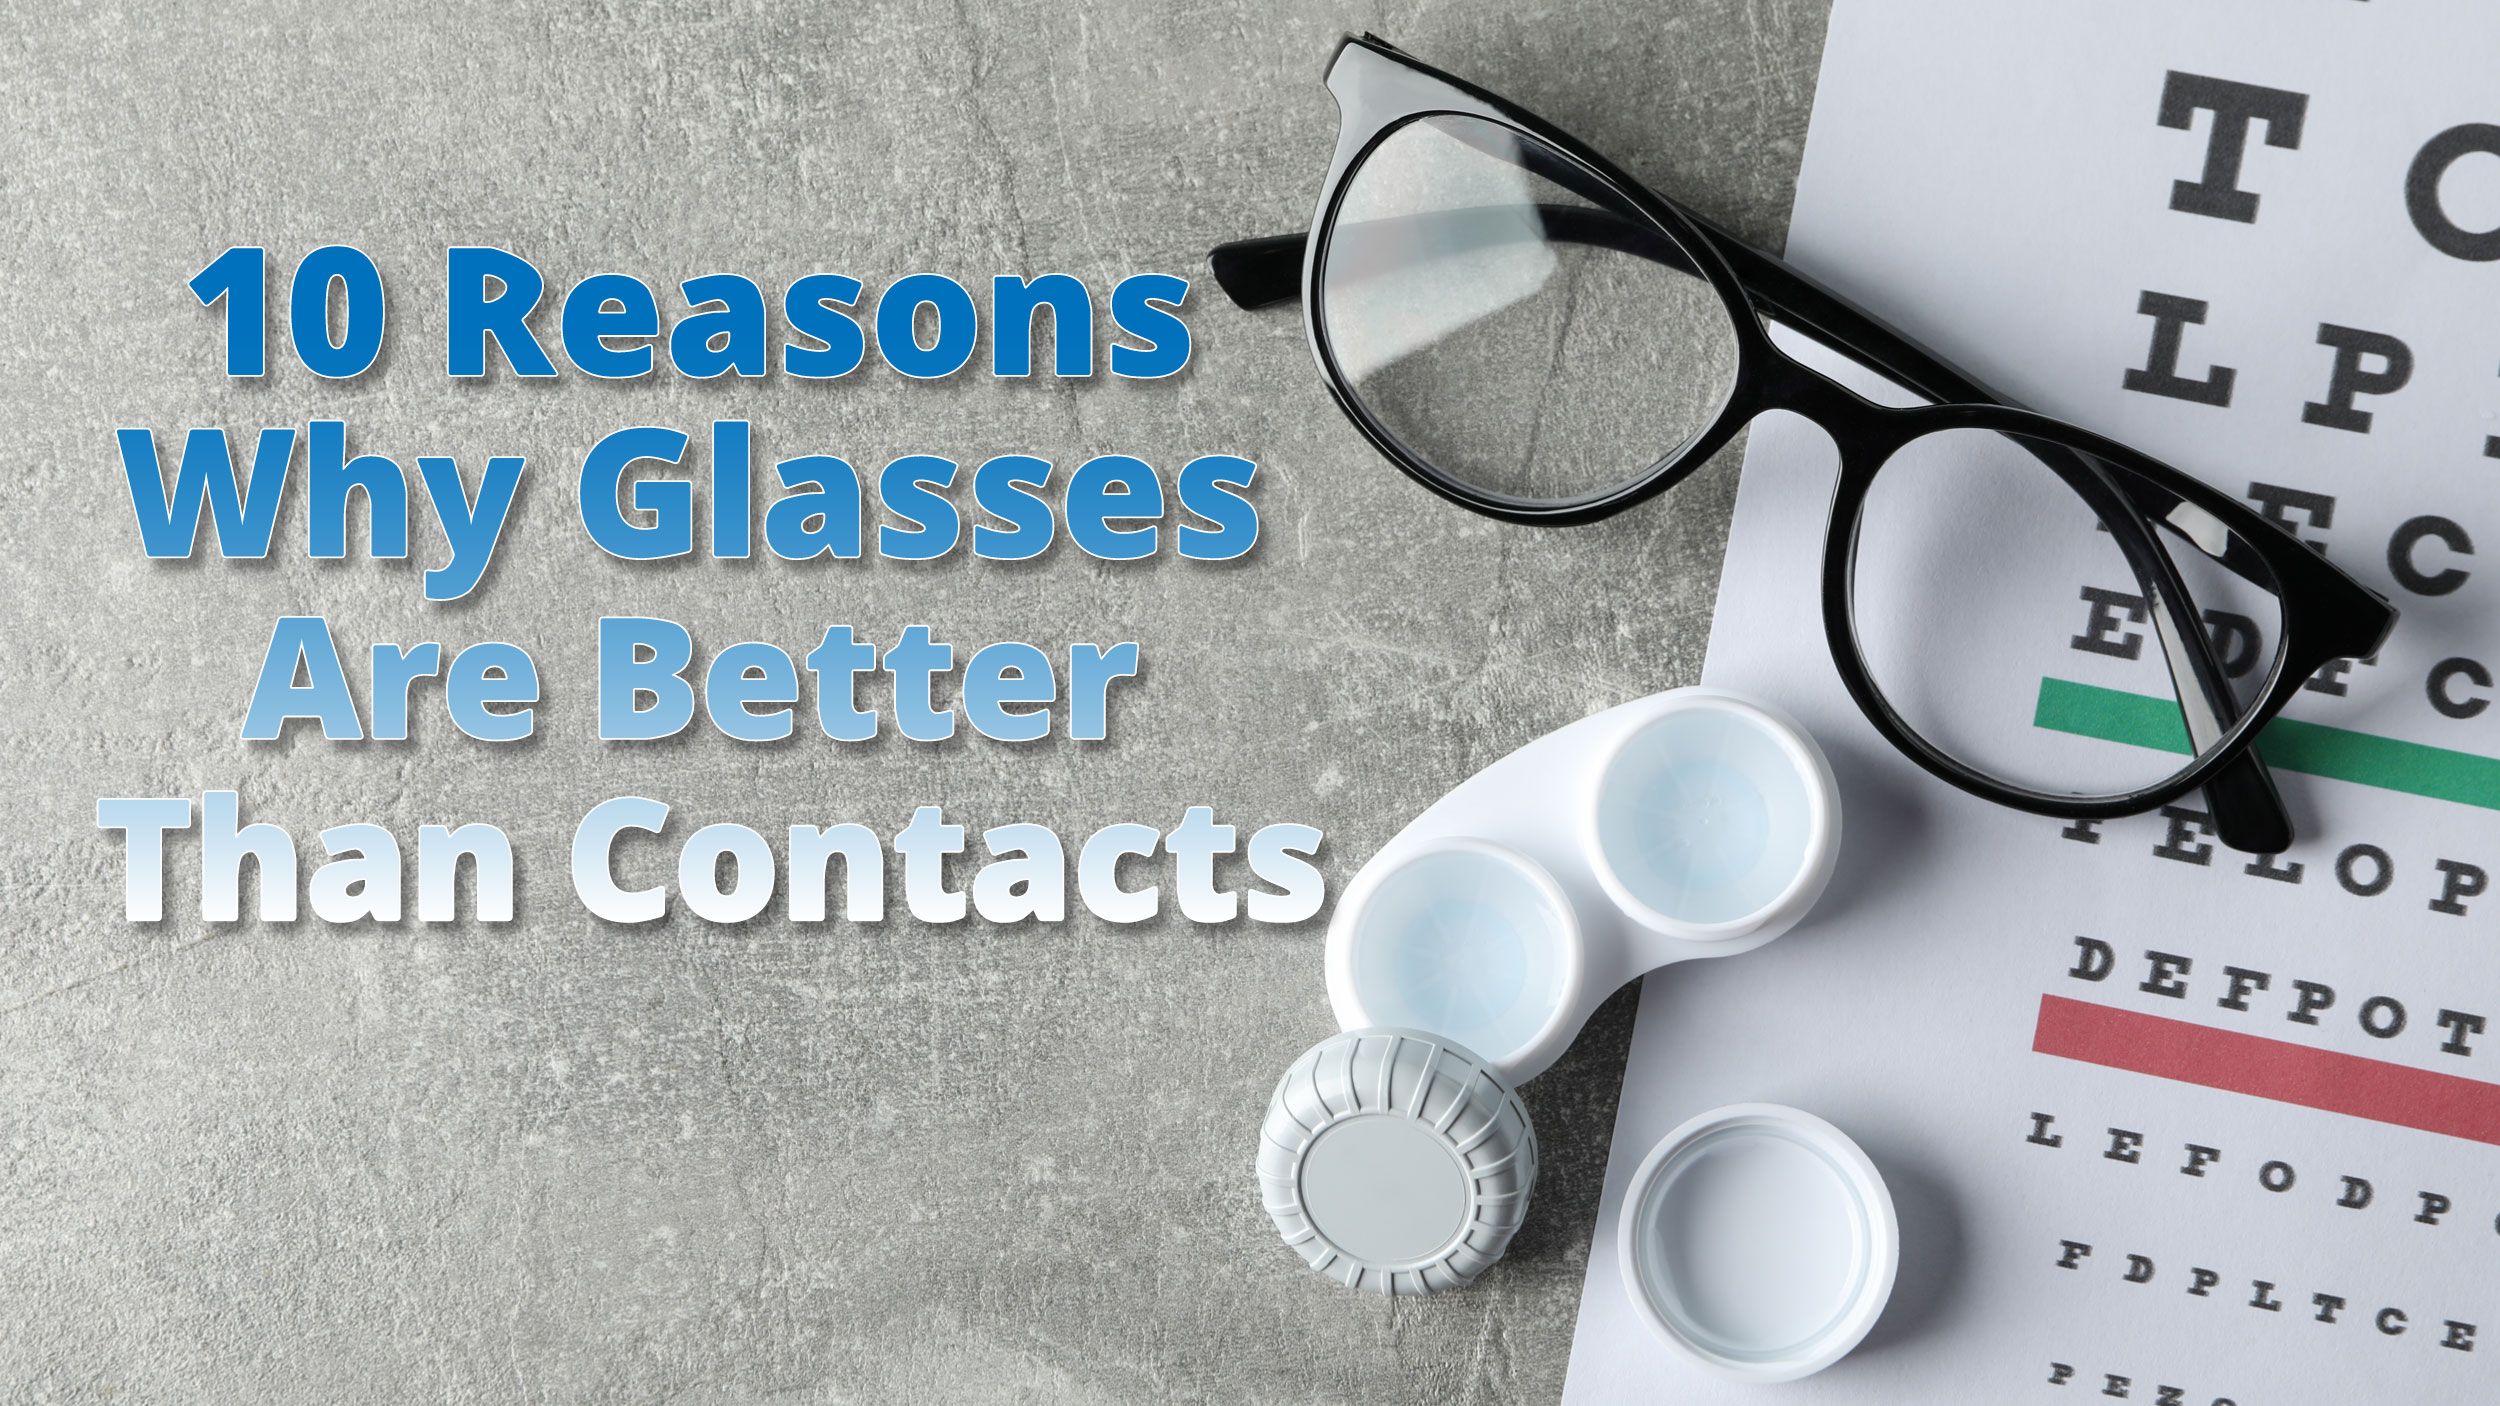 The 10 Ways Glasses Win Over Contact Lenses Header